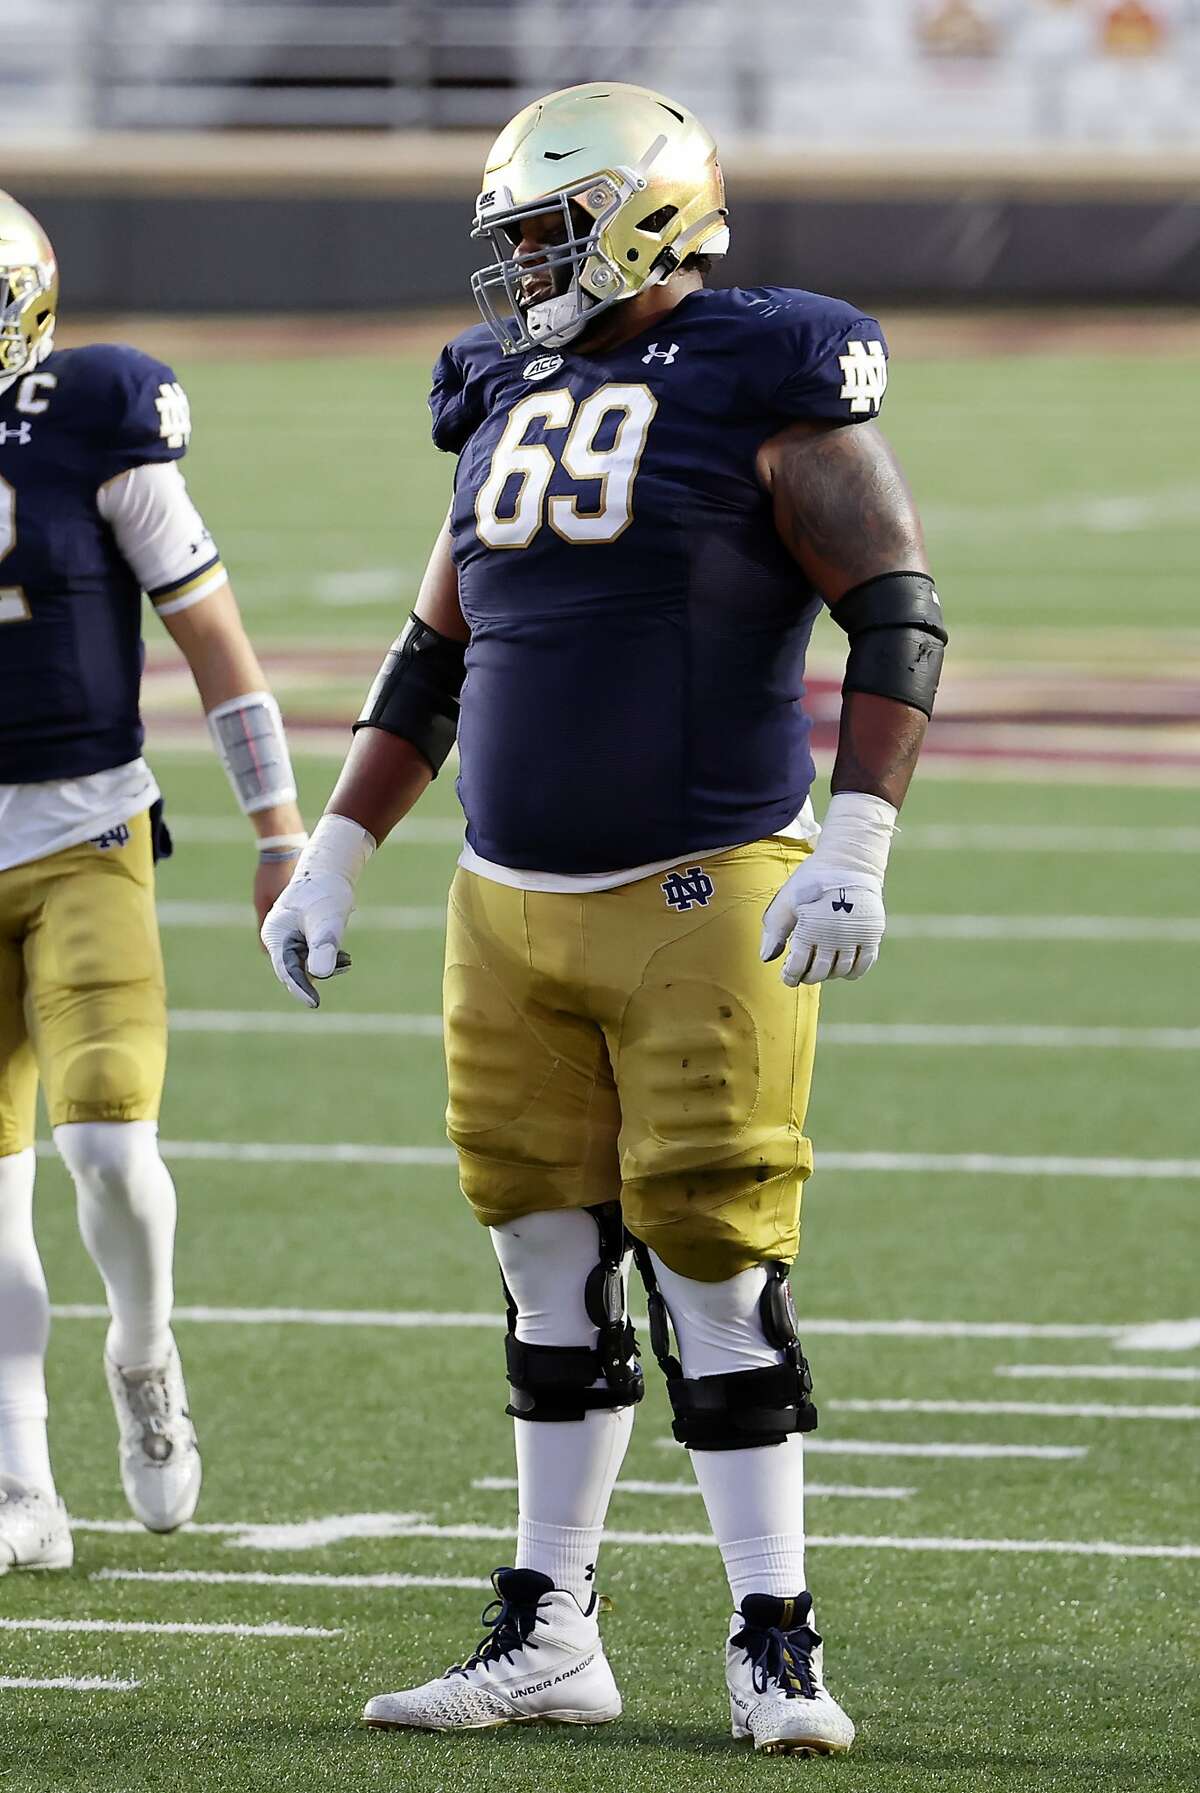 CHESTNUT HILL, MA - NOVEMBER 14: Notre Dame offensive lineman Aaron Banks (69) during a game between the Boston College Eagles and the Notre Dame Fighting Irish on November 14, 2020, at Alumni Stadium in Chestnut Hill, Massachusetts. (Photo by Fred Kfoury III/Icon Sportswire via Getty Images)